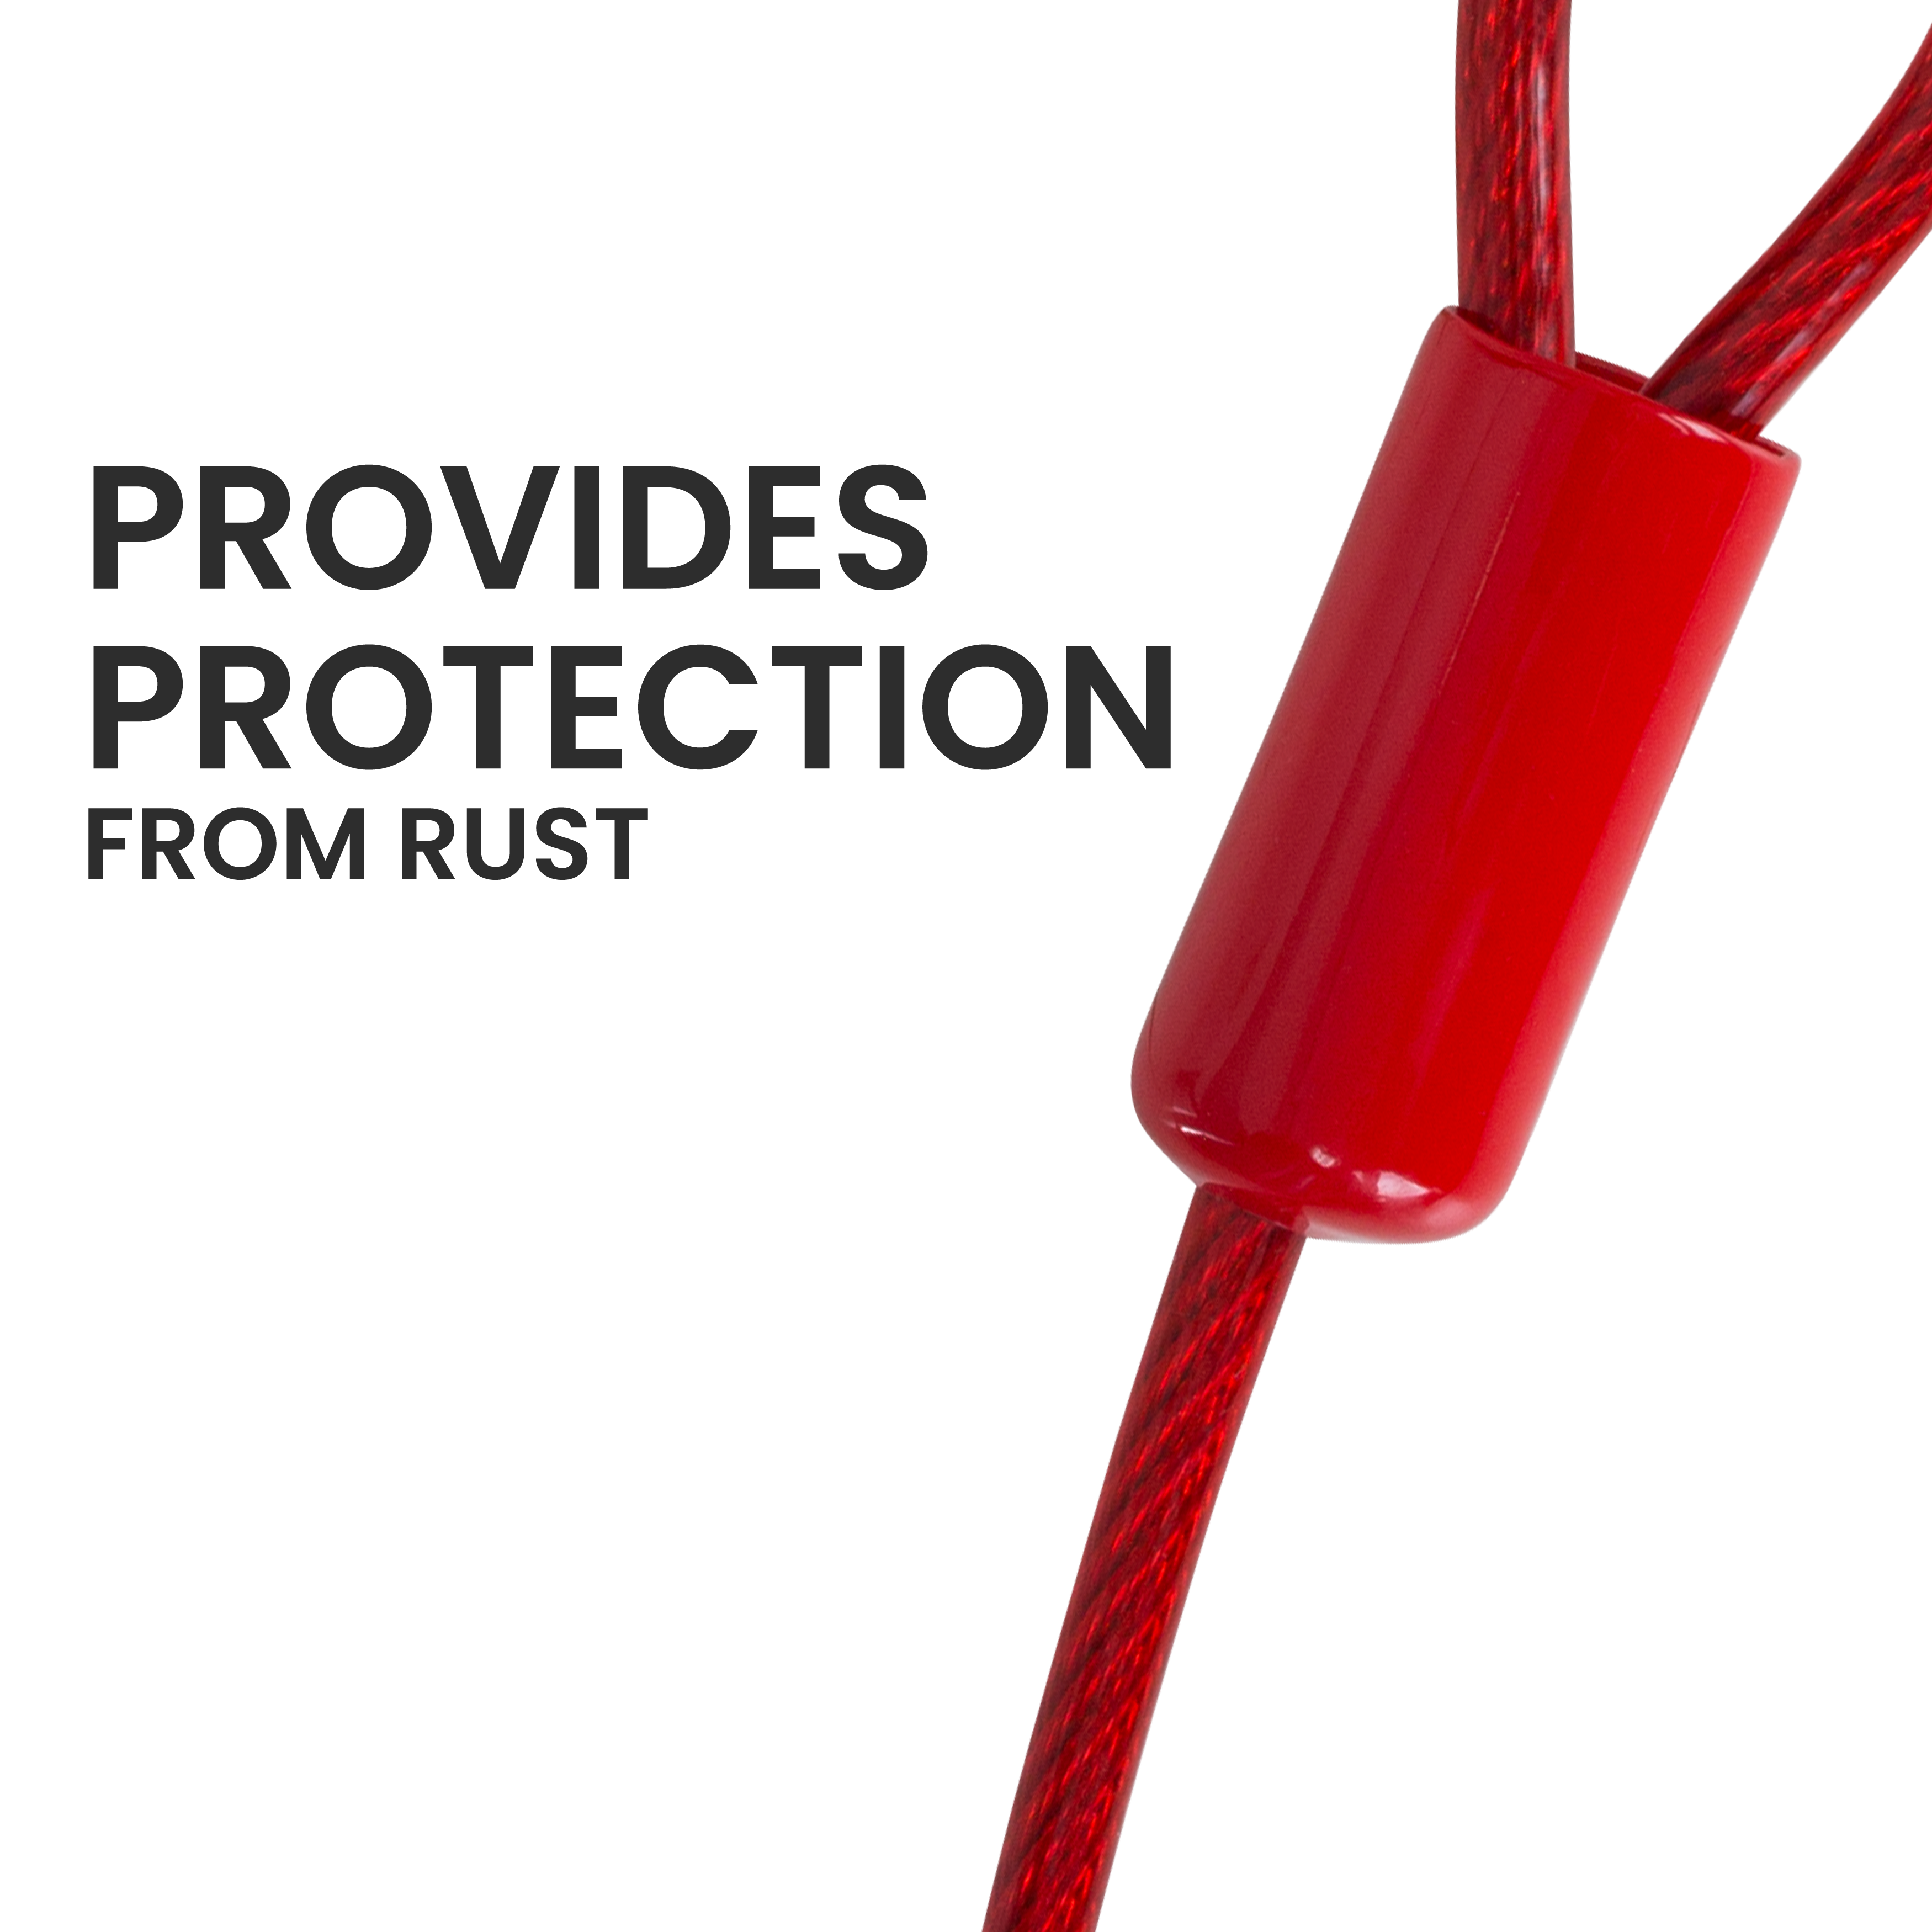 Cable Comes with Protection from Rust